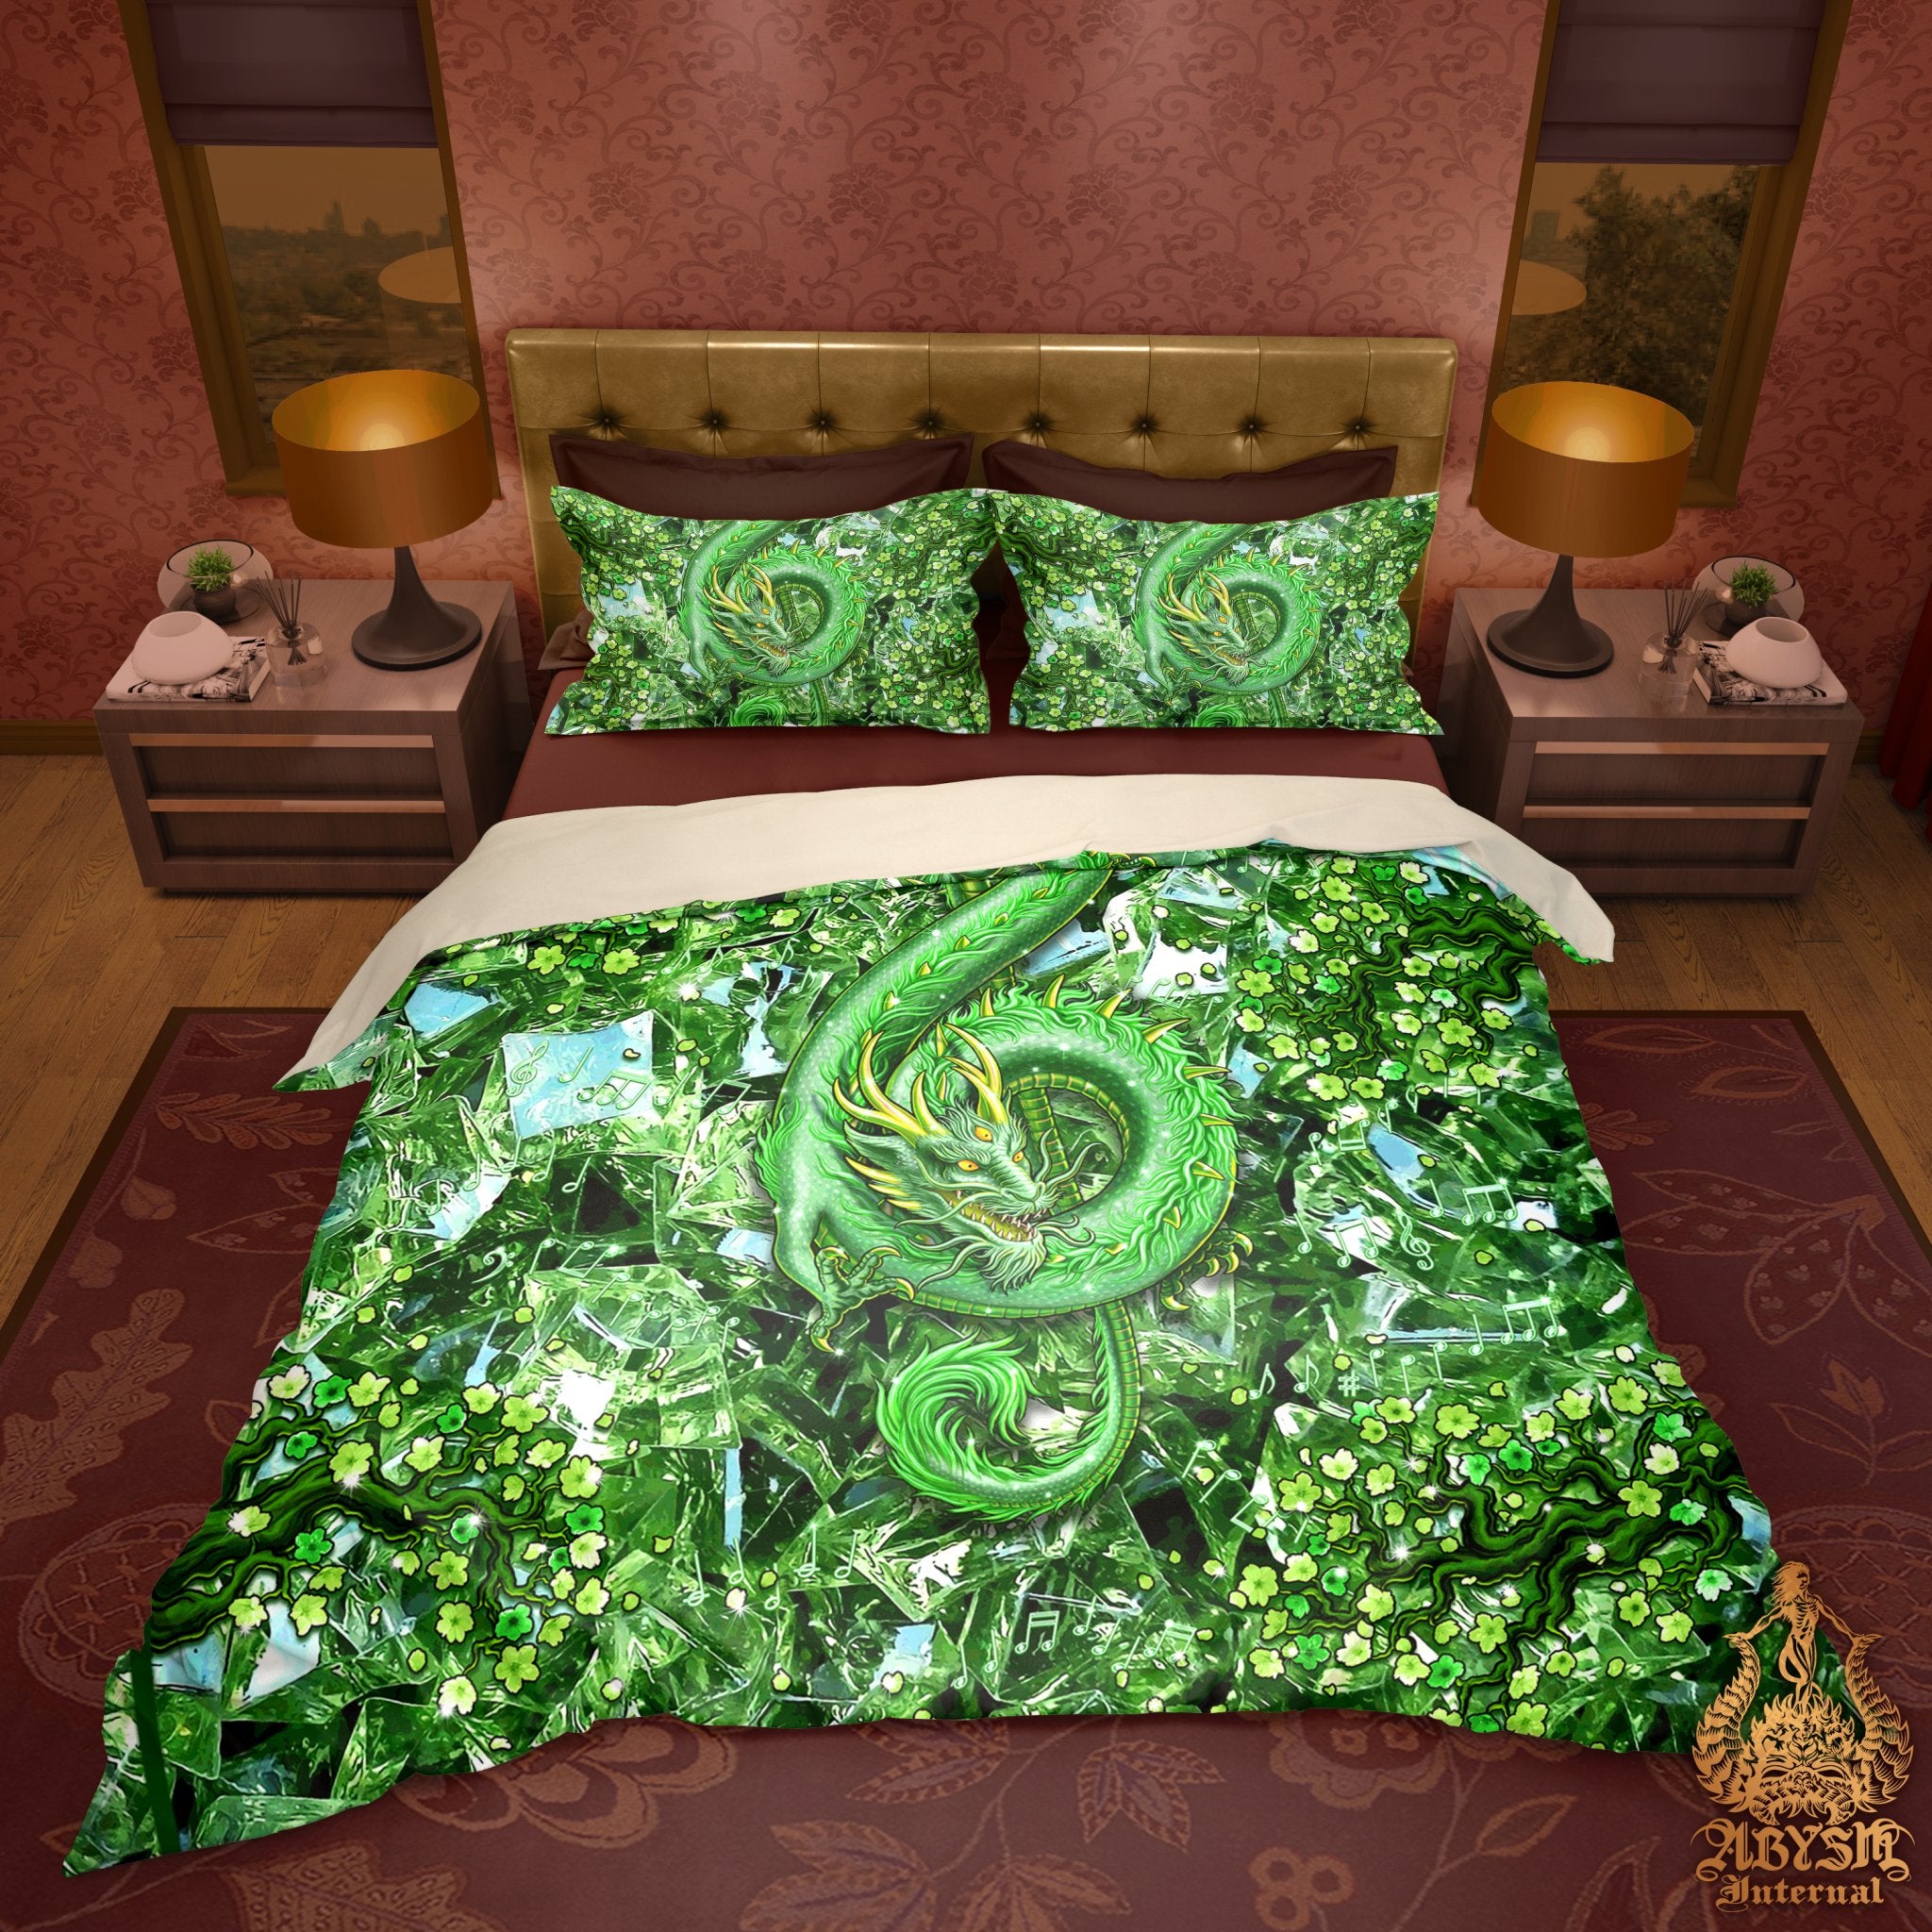 White Bed Cover, Dragon Duvet or Comforter, Indie Bedding Set, Bedroom Decor Music Art, King, Queen & Twin Size - Gemstone - Abysm Internal